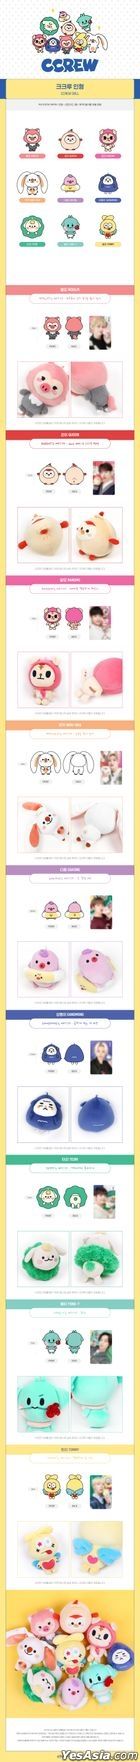 Cravity 'CCREW' Official Goods - Doll (WOOLPI)